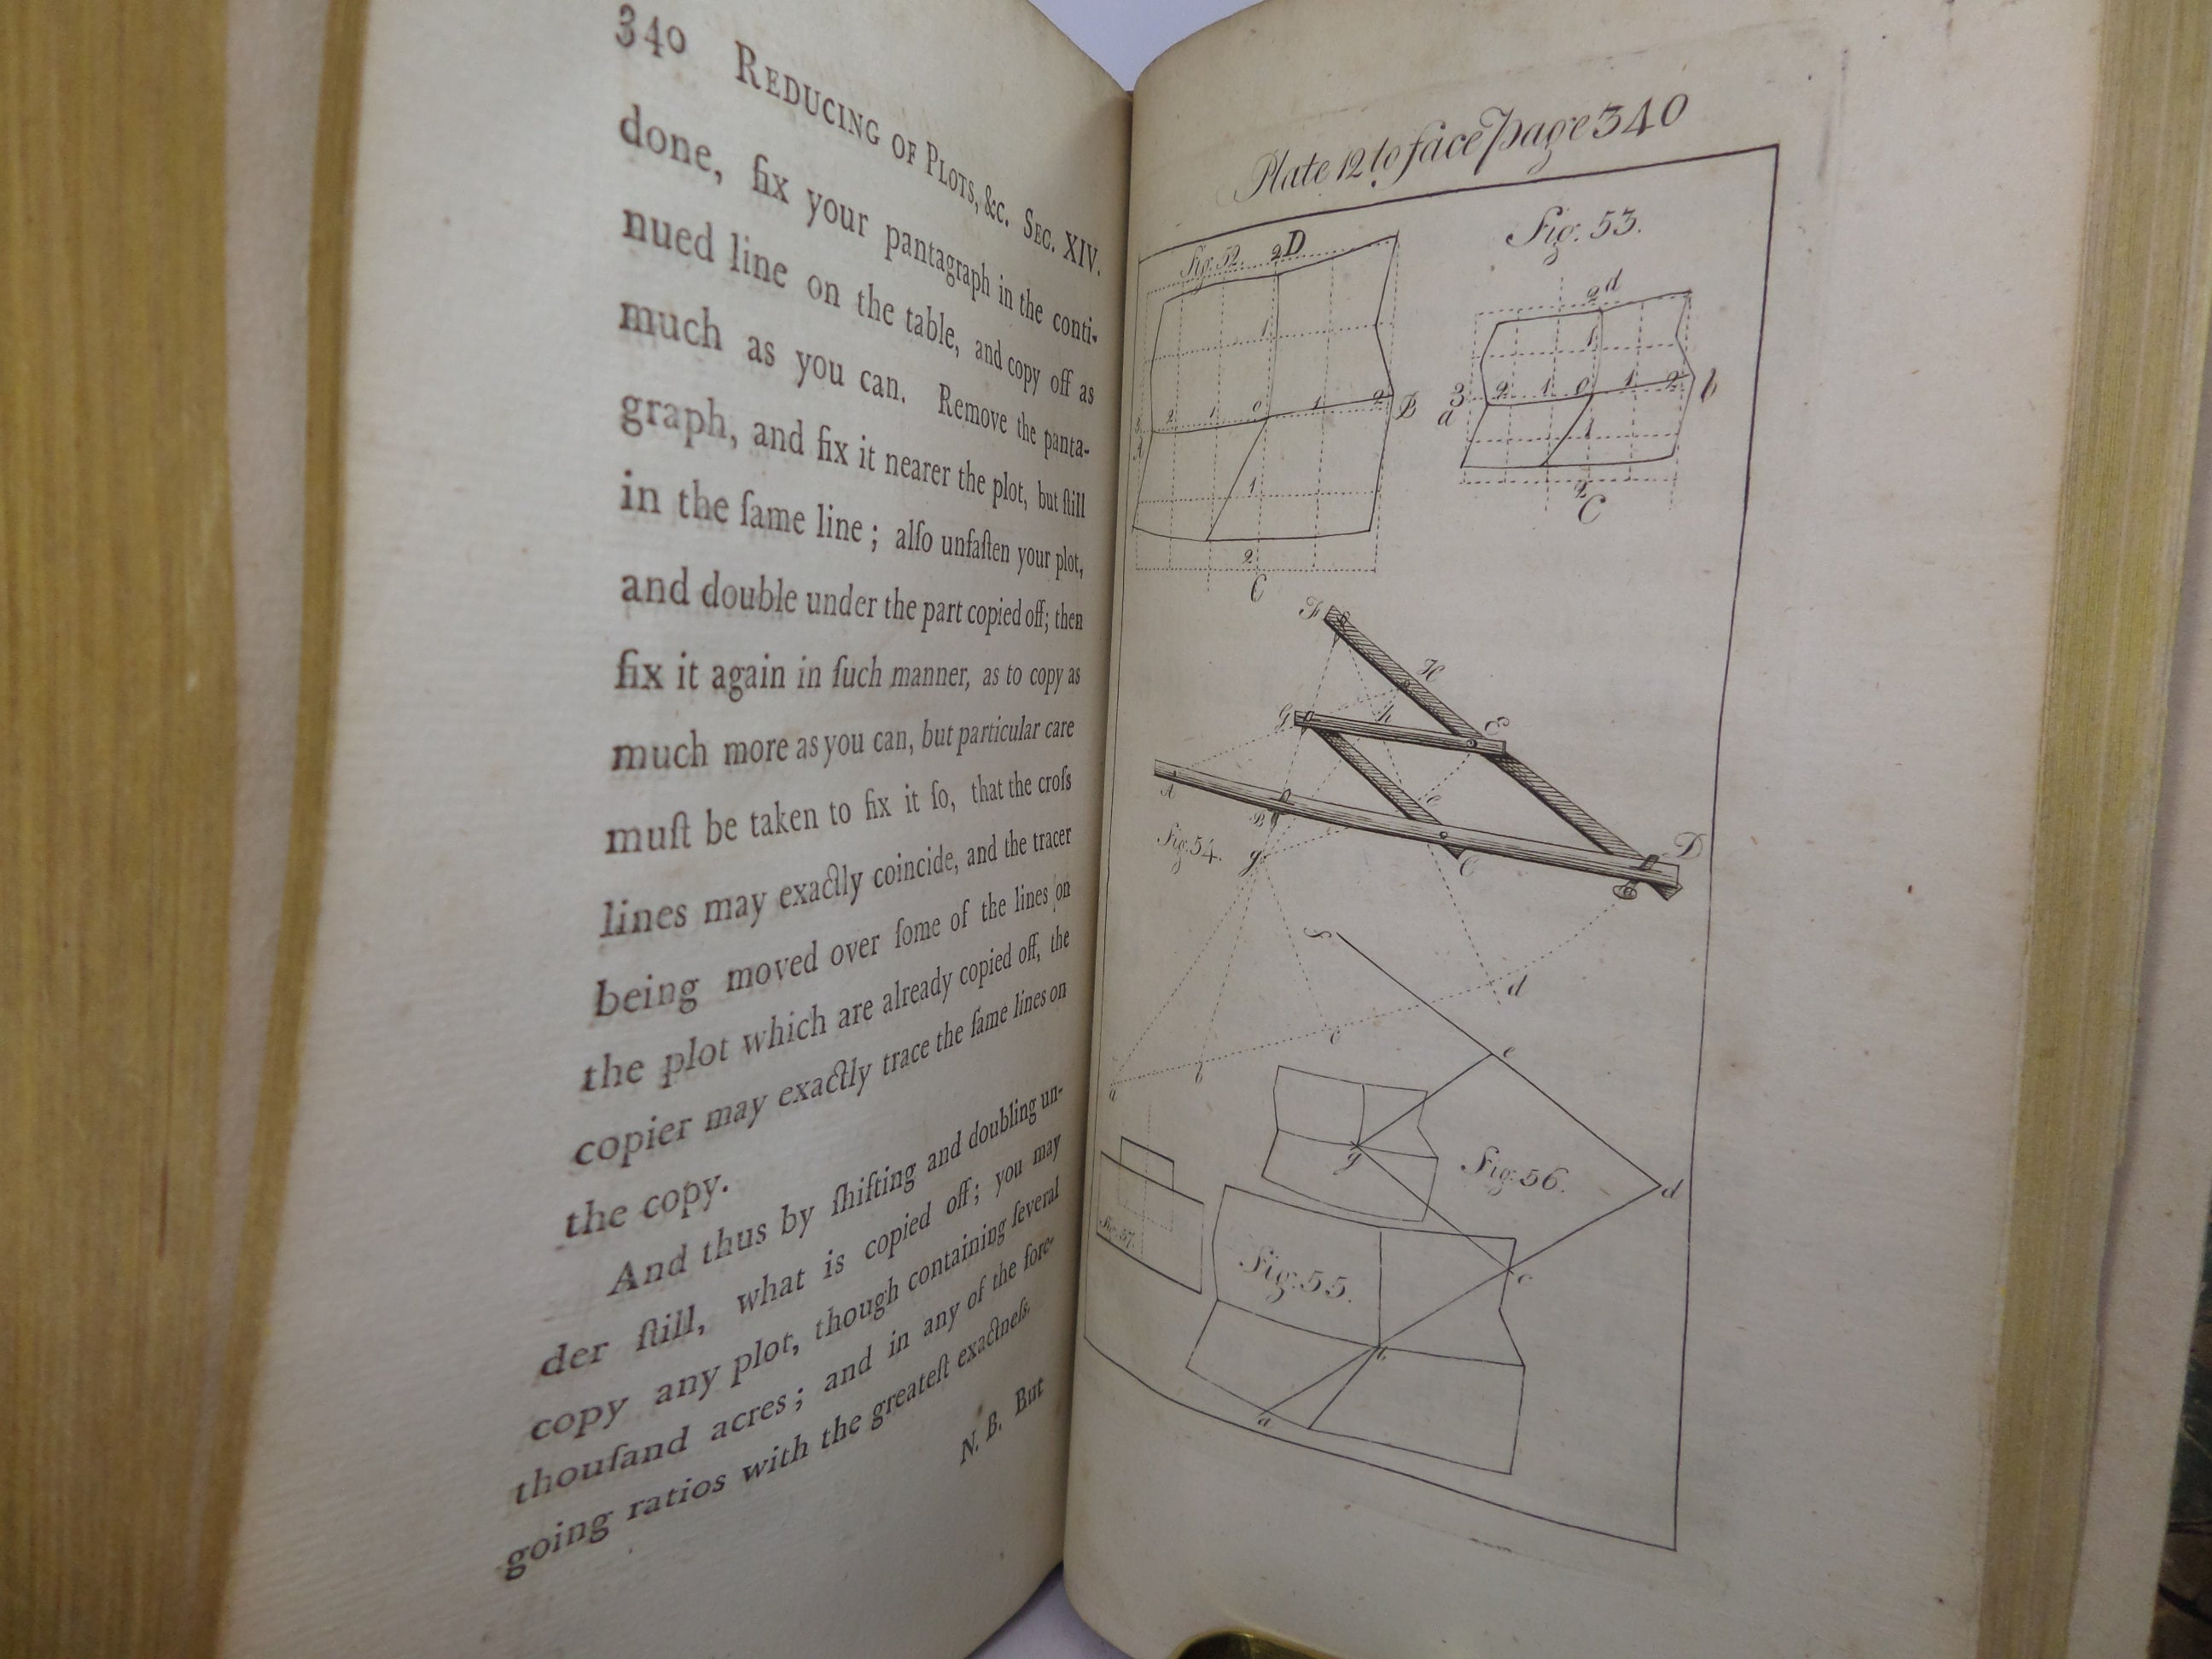 THE NEW ART OF LAND MEASURING; OR, A TURNPIKE ROAD TO PRACTICAL SURVEYING 1779